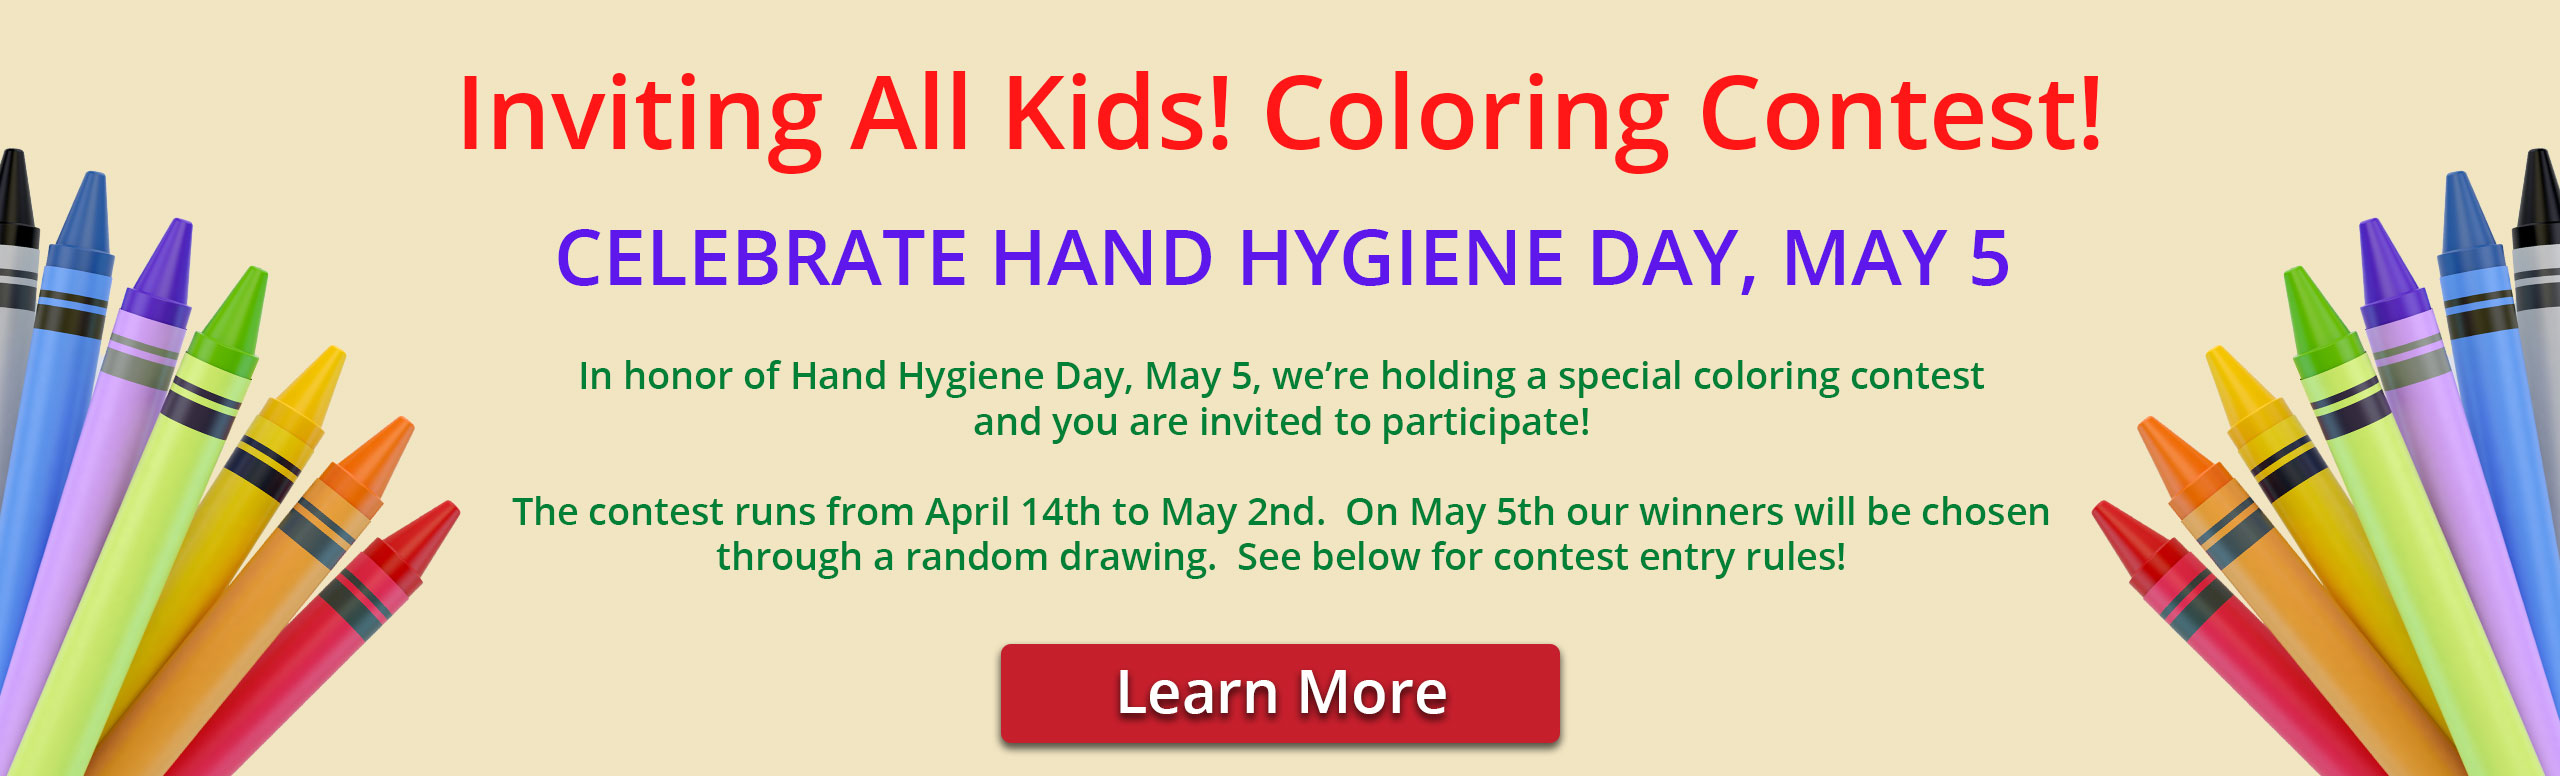 Banner picture of colorful crayons on each side of banner.

Banner says:
Inviting All Kids! Coloring Contest!

CELEBRATE HAND HYGIENE DAY, MAY 5

In honor of Hand Hygiene Day, May 5, we're holding a special coloring contest and you are invited to participate

The contest runs from April 14th to May 2nd. On May 5th our winners will be chosen through a random drawing. See below for contest entry rules!

Link to click says:
Learn More